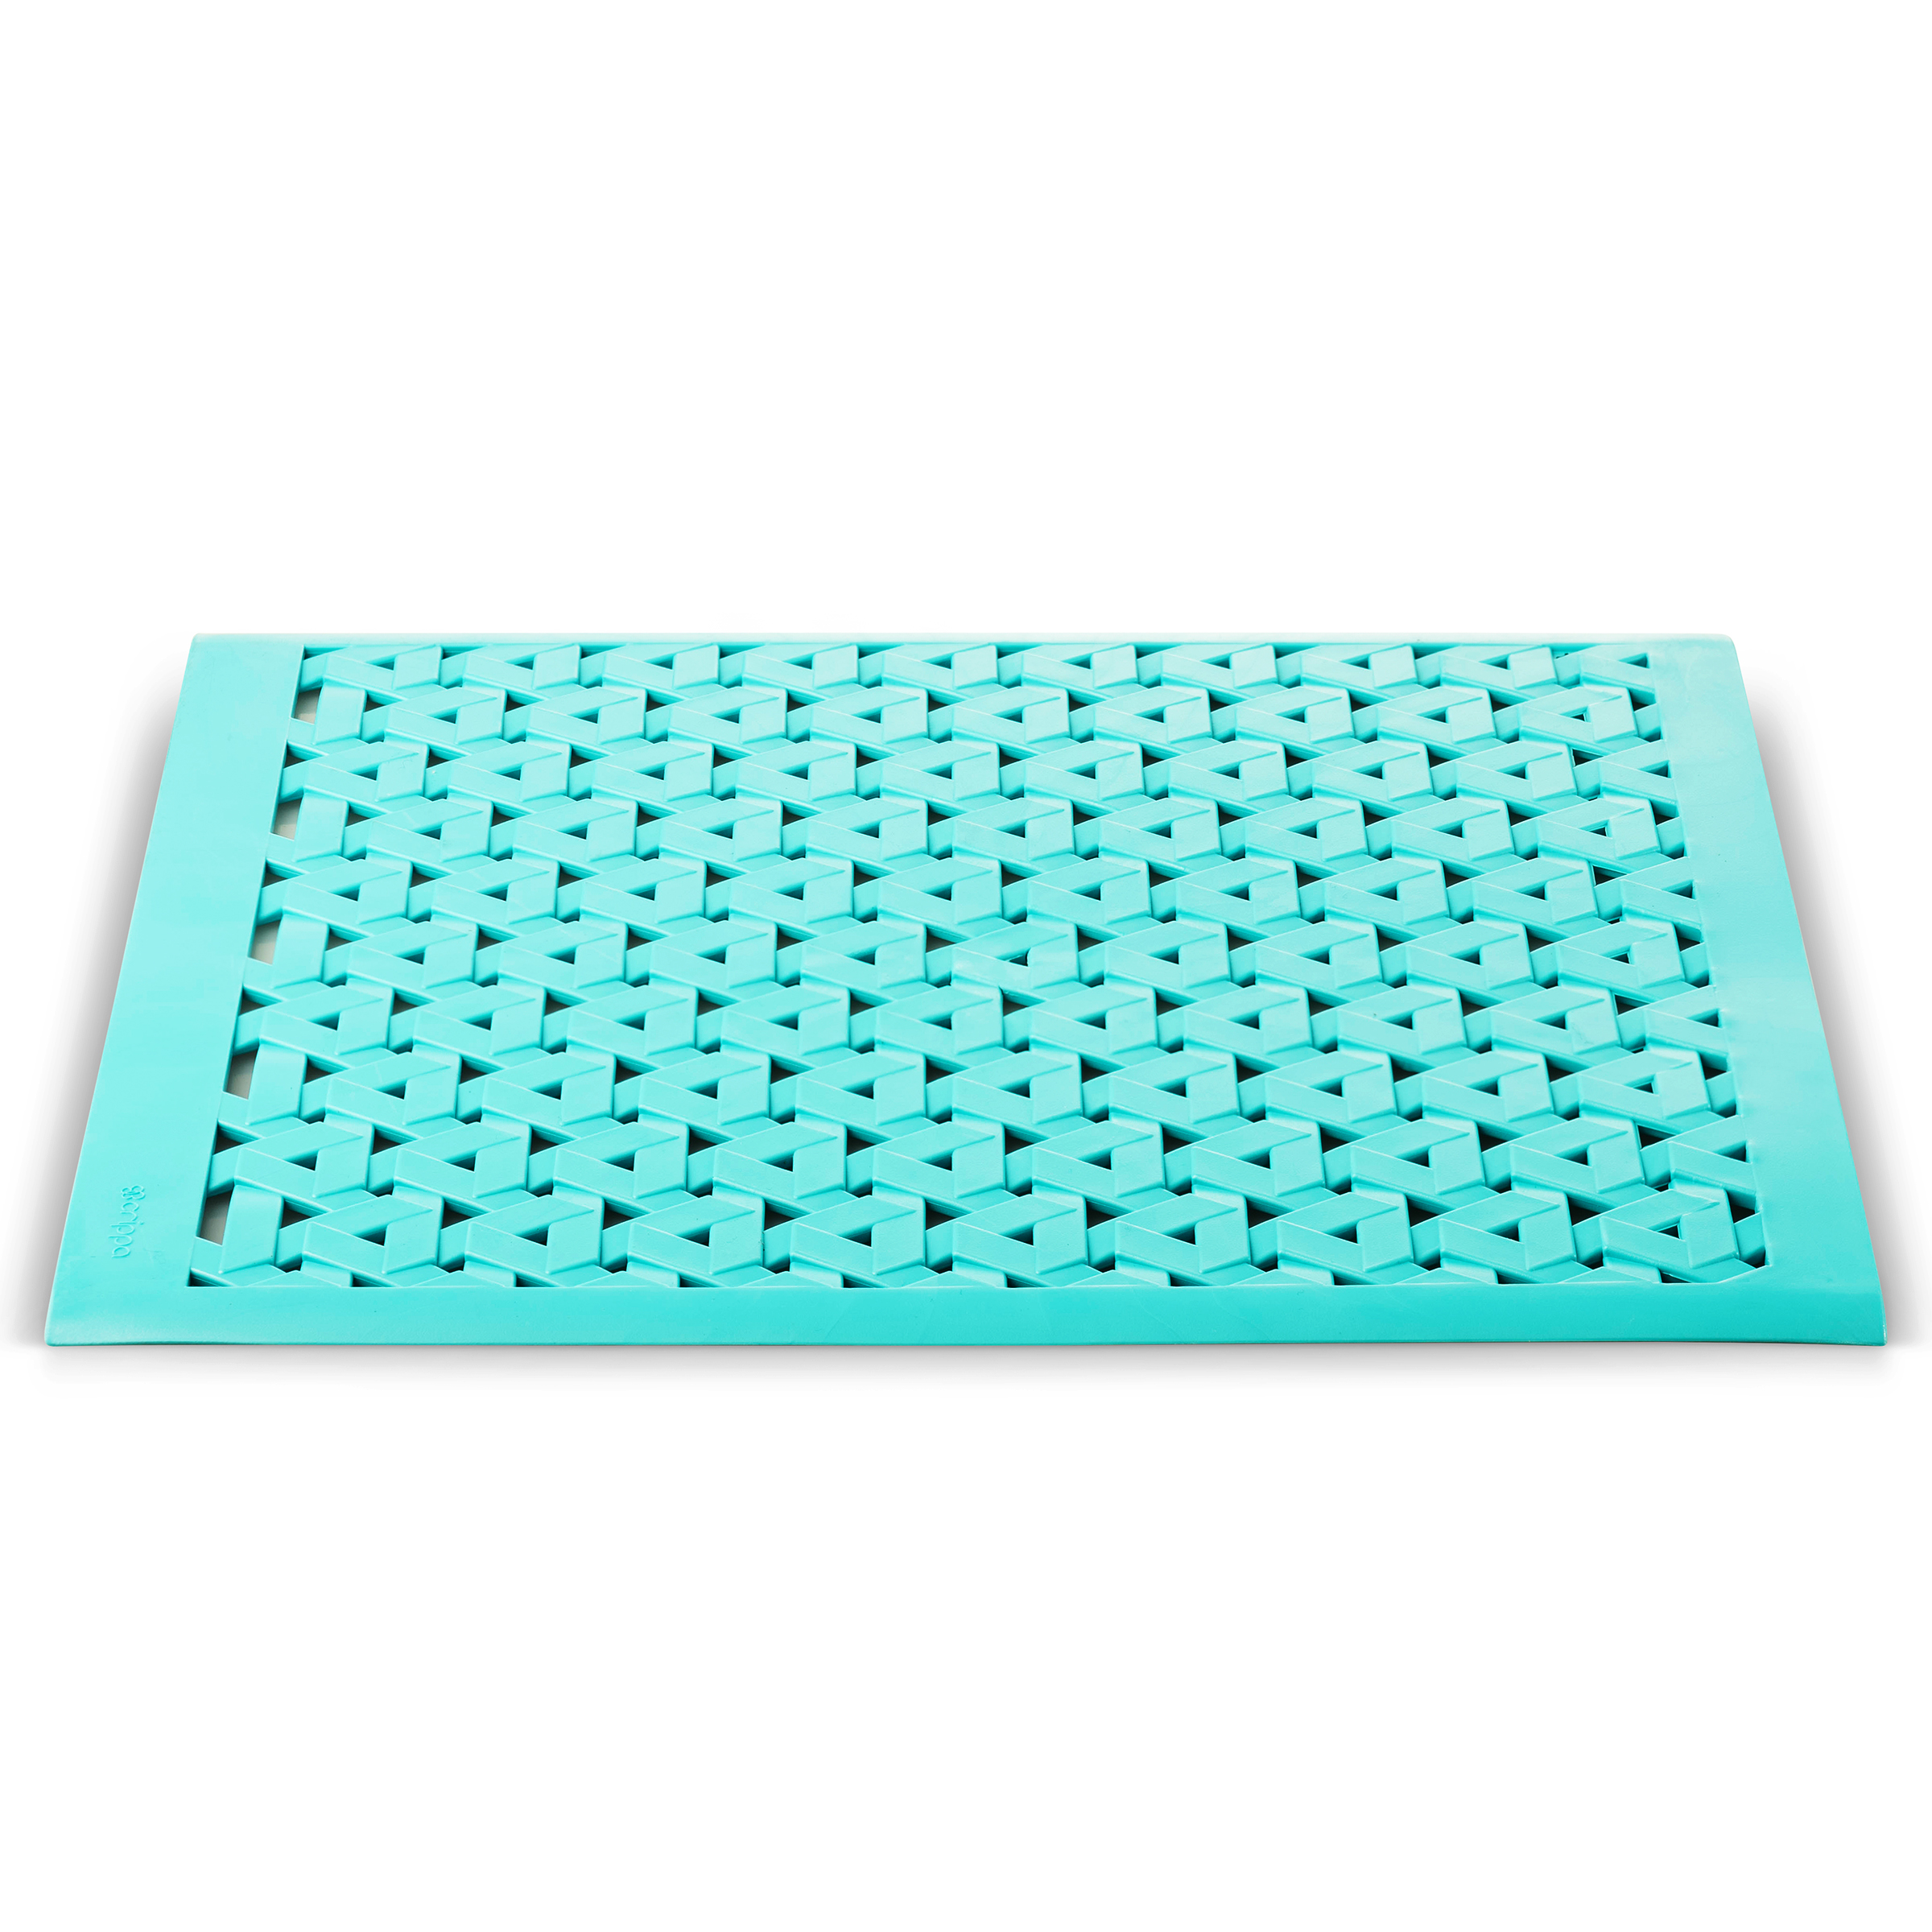 Crippa Kitchen Sink Protector Mat | Set of 2 Sink Mats for Porcelain Sink | Kitchen Sink Mats For Double Sink | Anti-Bacterial, Mildew Resistant Sink Mats | Turquoise - image 5 of 6